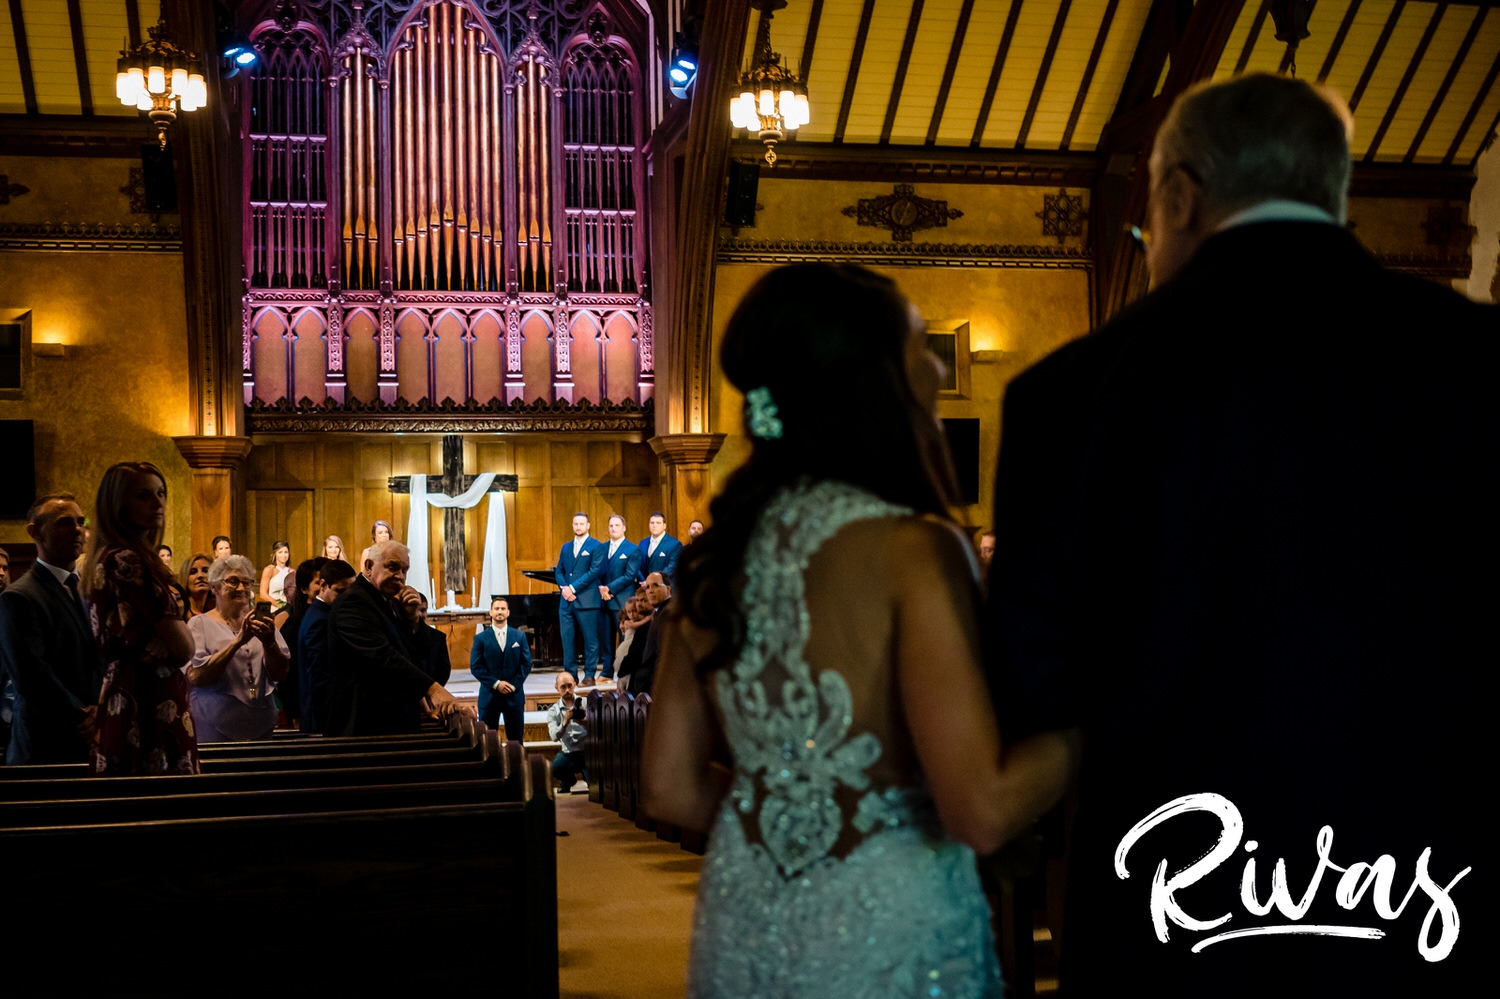 A candid, wide, picture taken from the back of the church as a bride and her grandpa turn to walk down the main aisle of the church, as her groom and the rest of the wedding party is visible in the background of the image. 